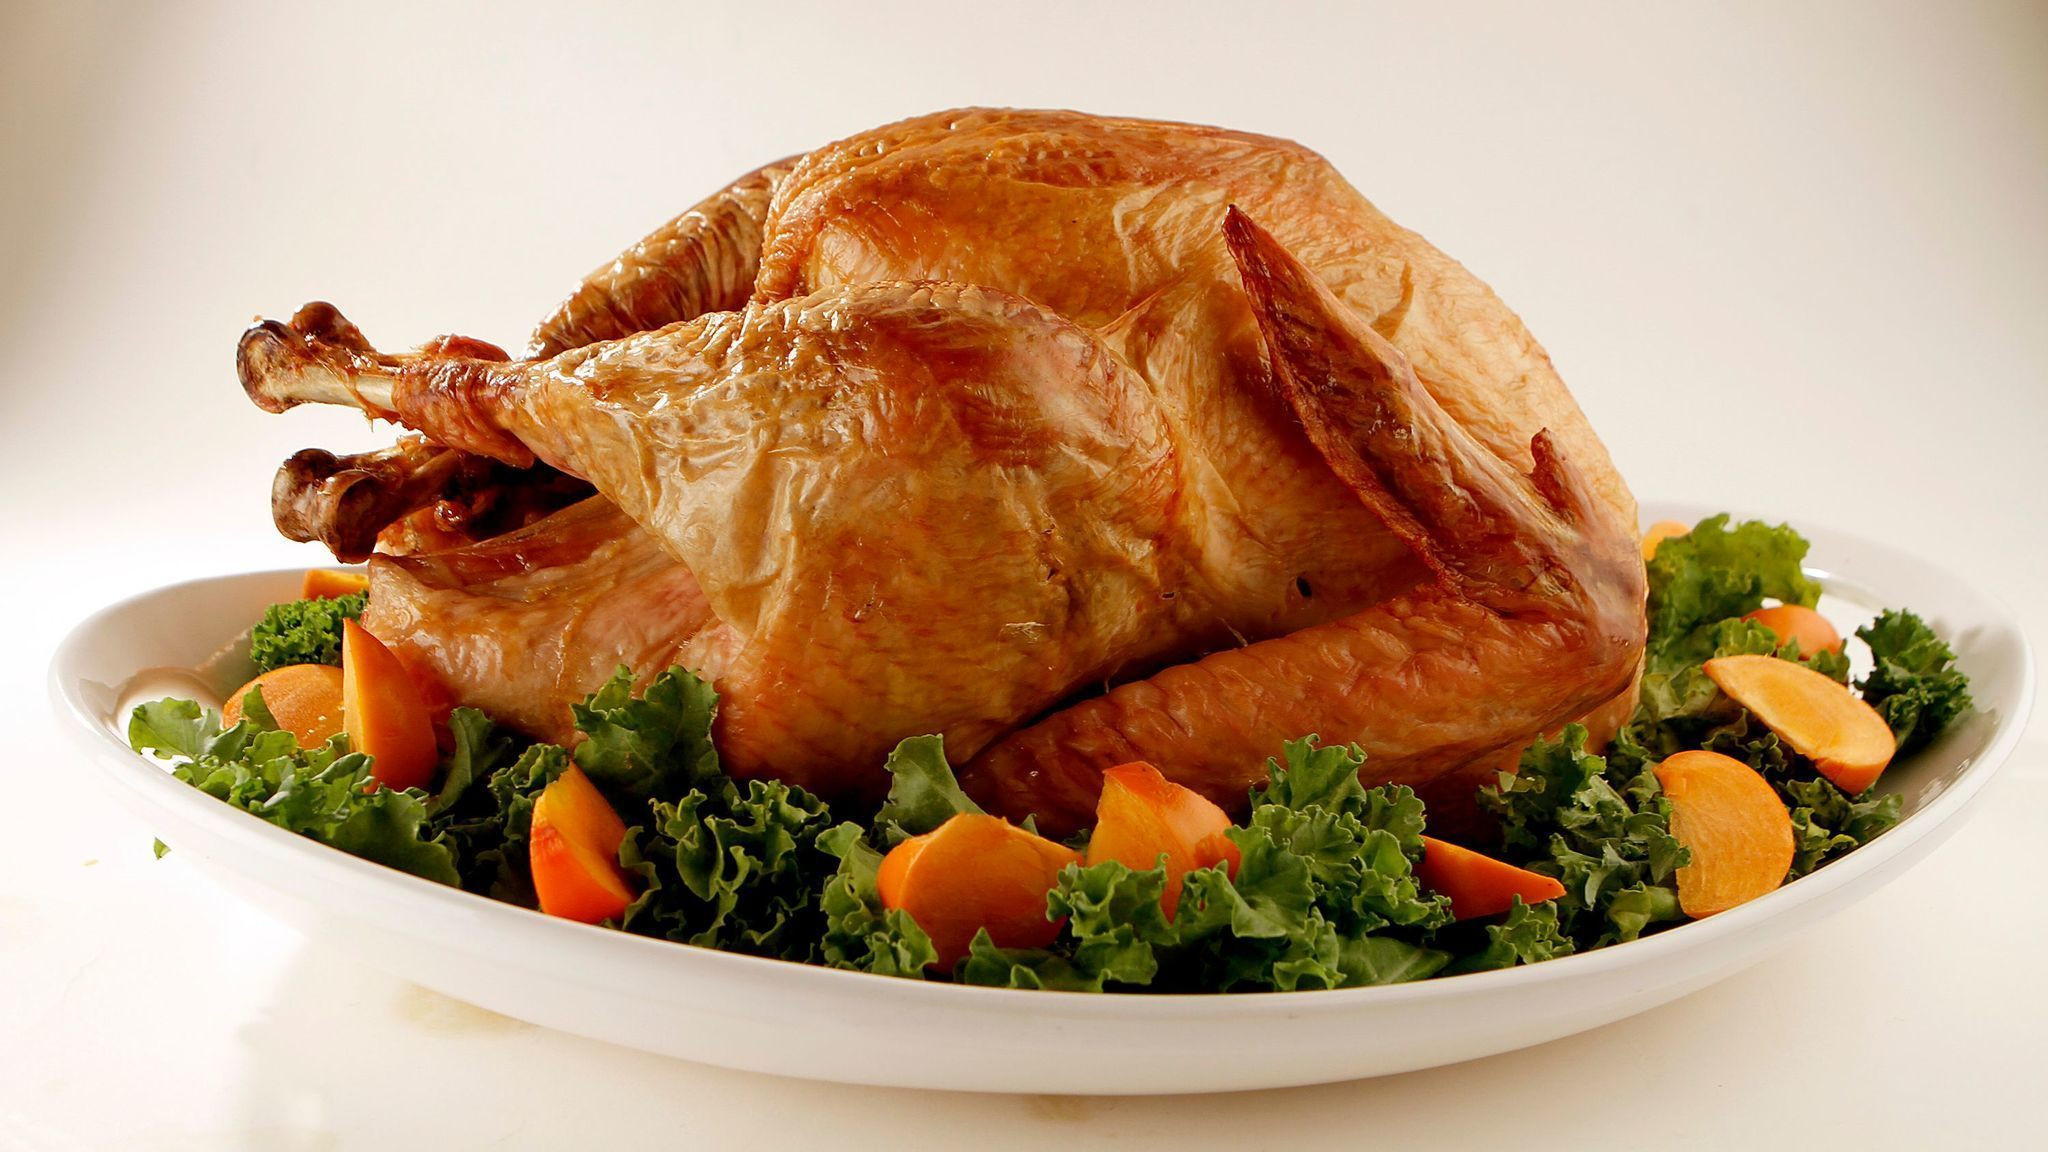 Thanksgiving Turkey Photos
 A beginner s guide to cooking a Thanksgiving turkey LA Times